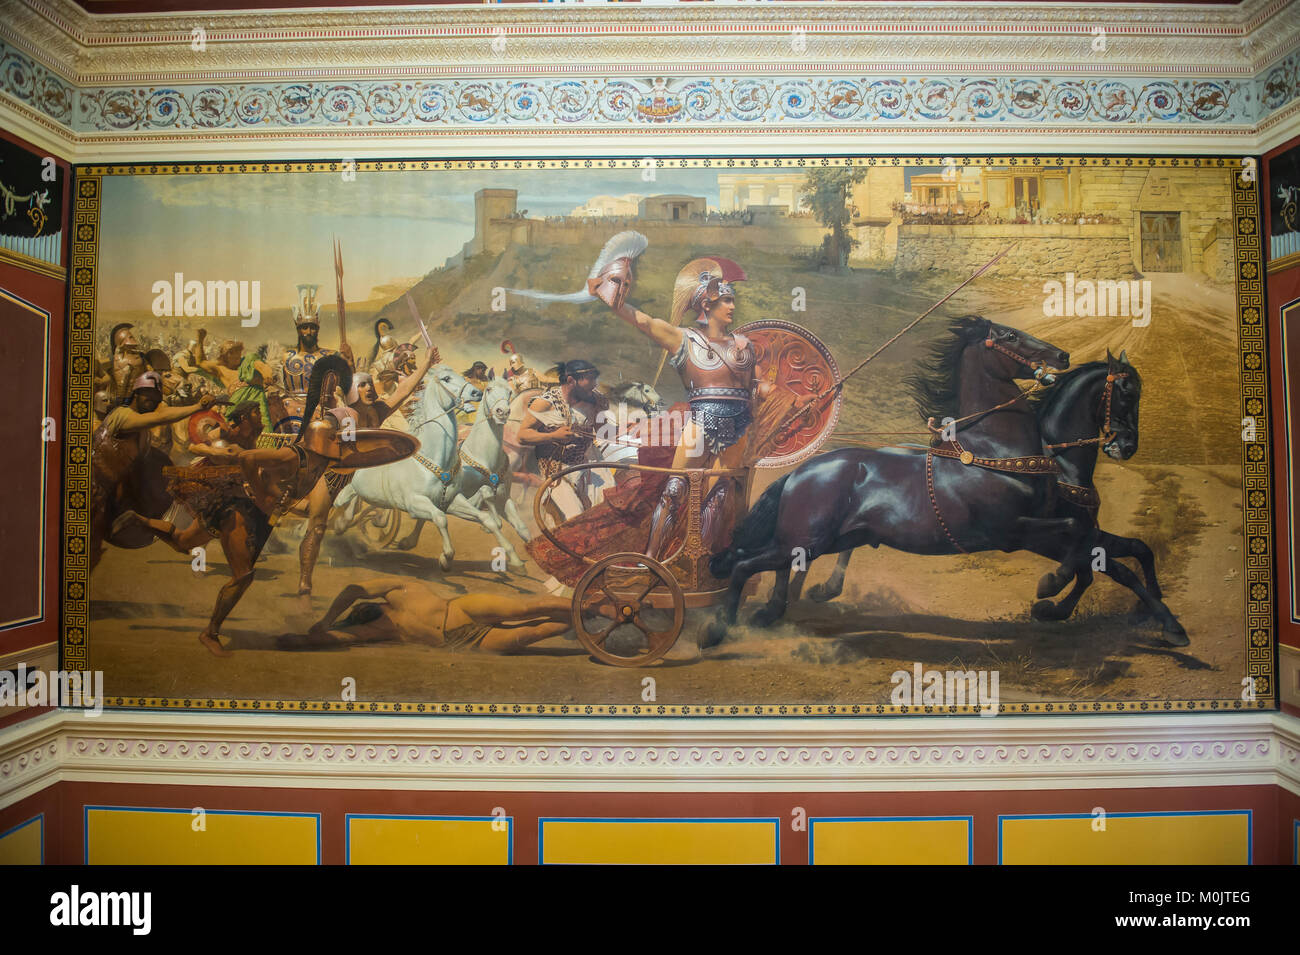 The Triumph of Achilles painting in the Achilleion palace, old town of Corfu, Ioanian islands, Greece Stock Photo